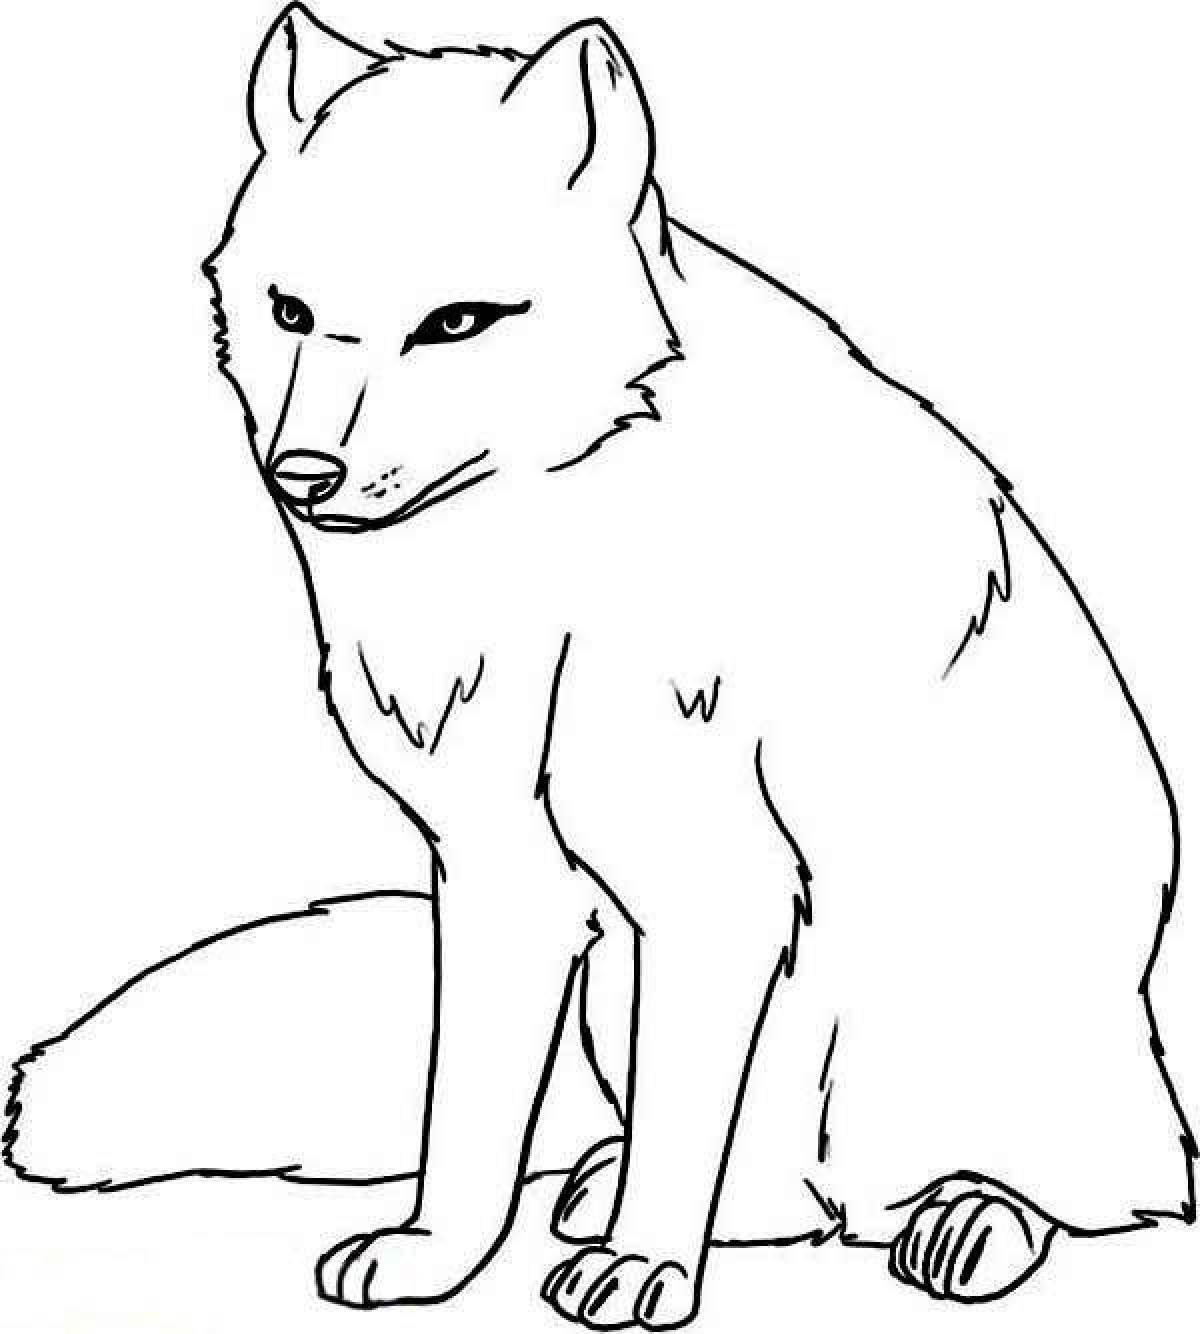 Coloring page graceful arctic fox